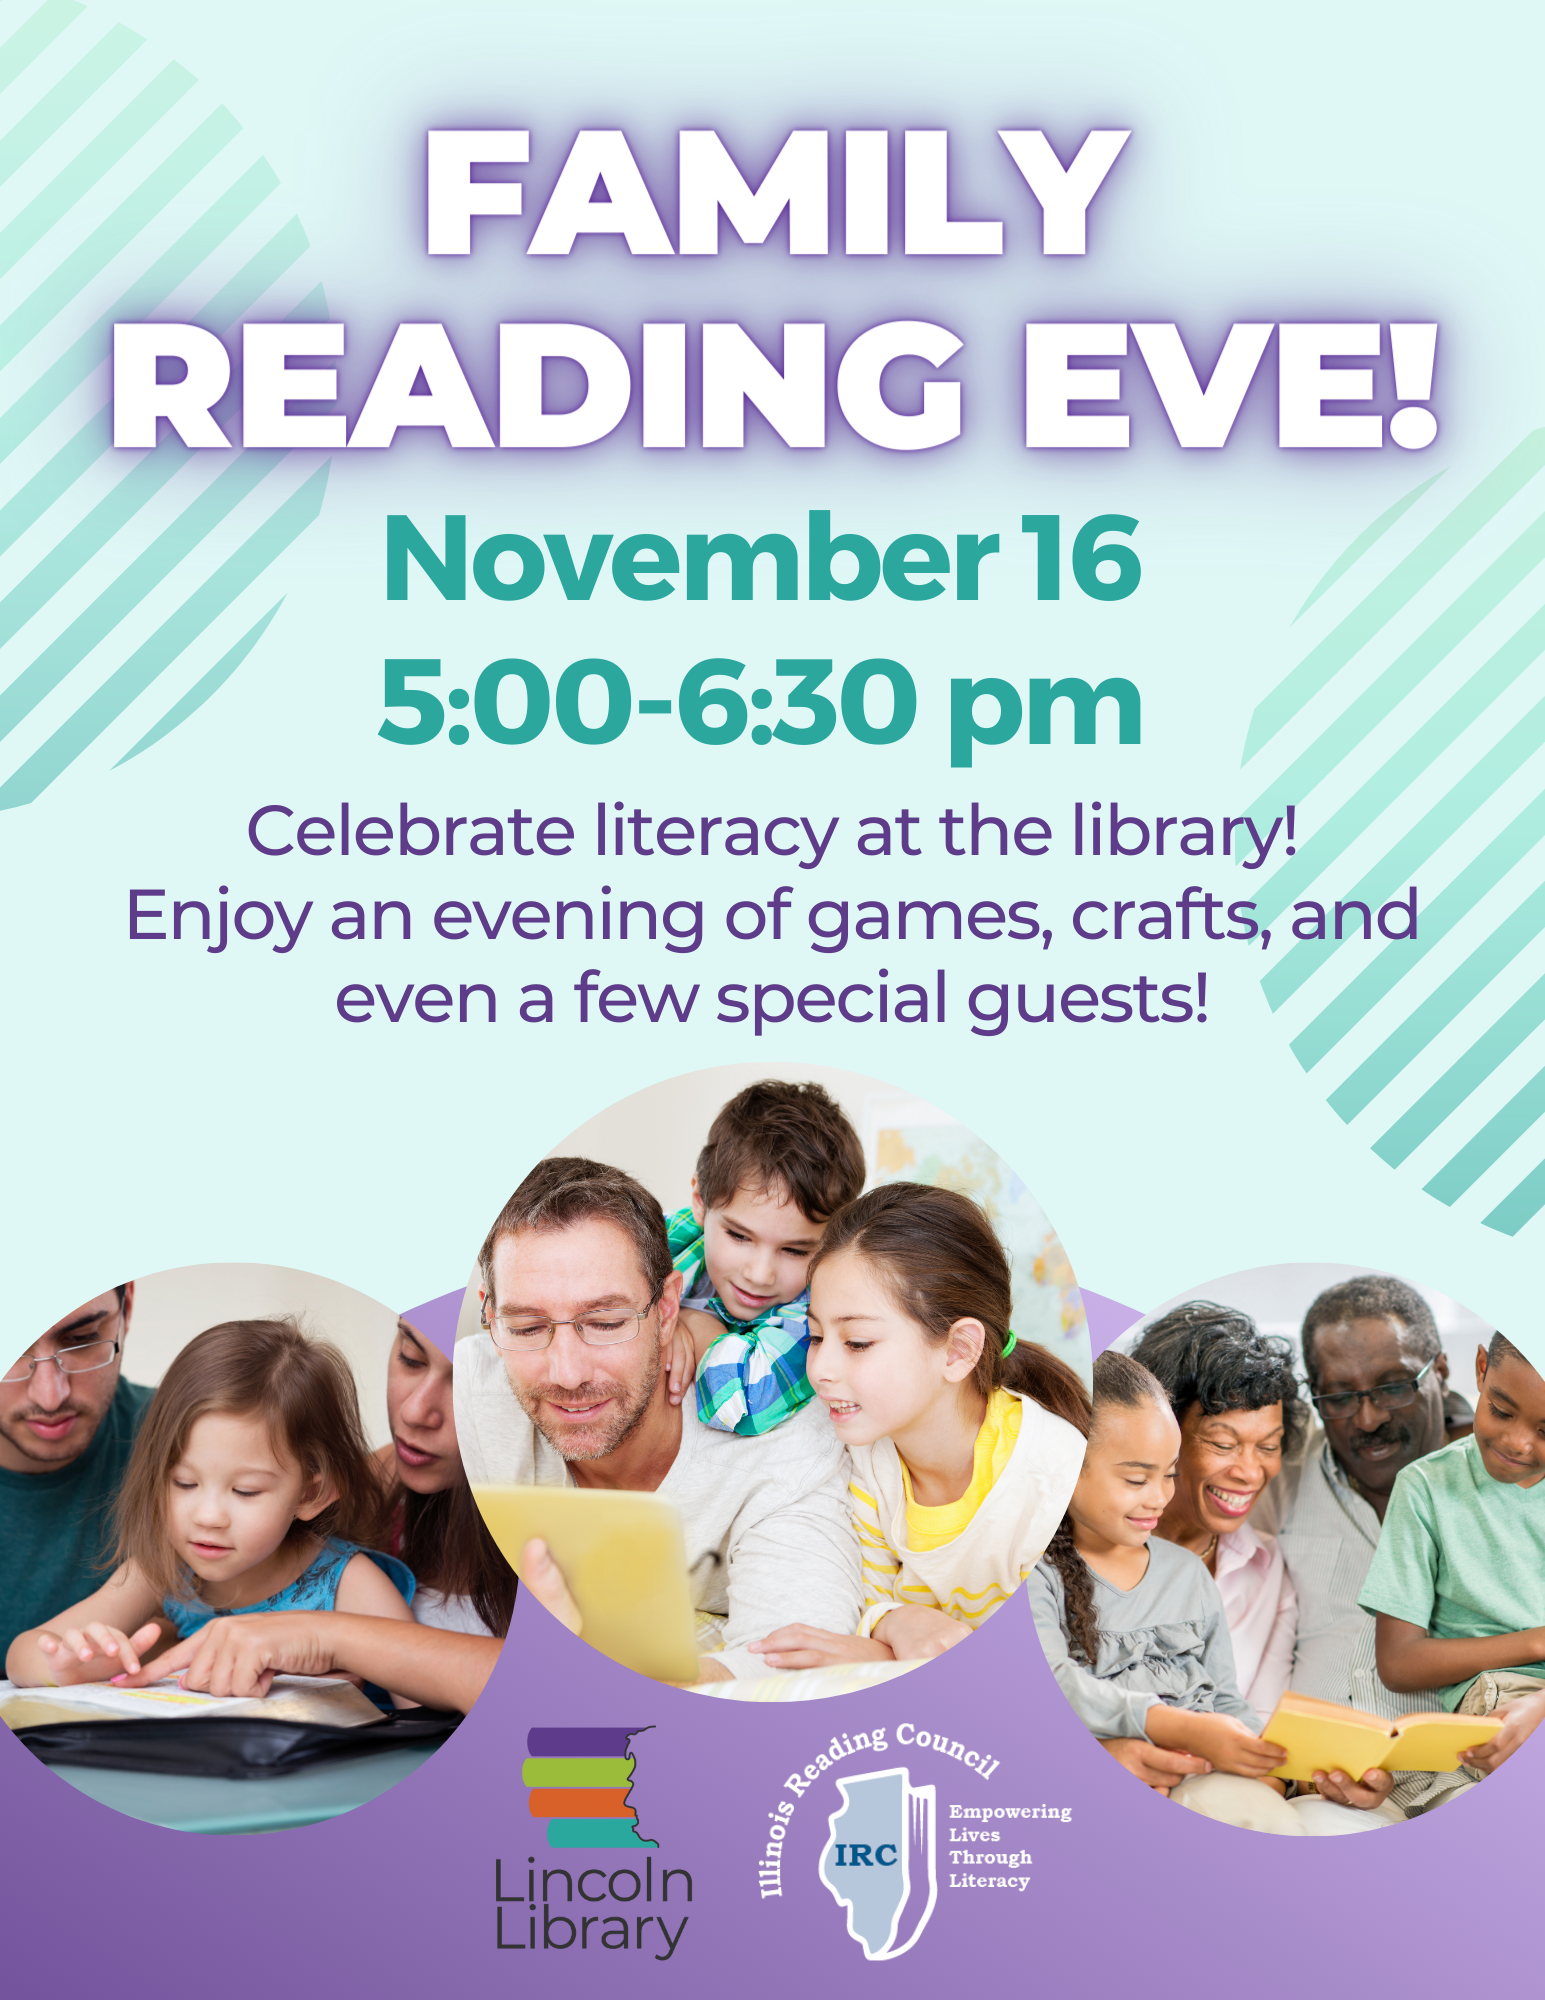 A flyer titled Family Reading Eve, on November 16 from 5 to 6:30 pm. It is light blue and purple and features three photos of families reading together.